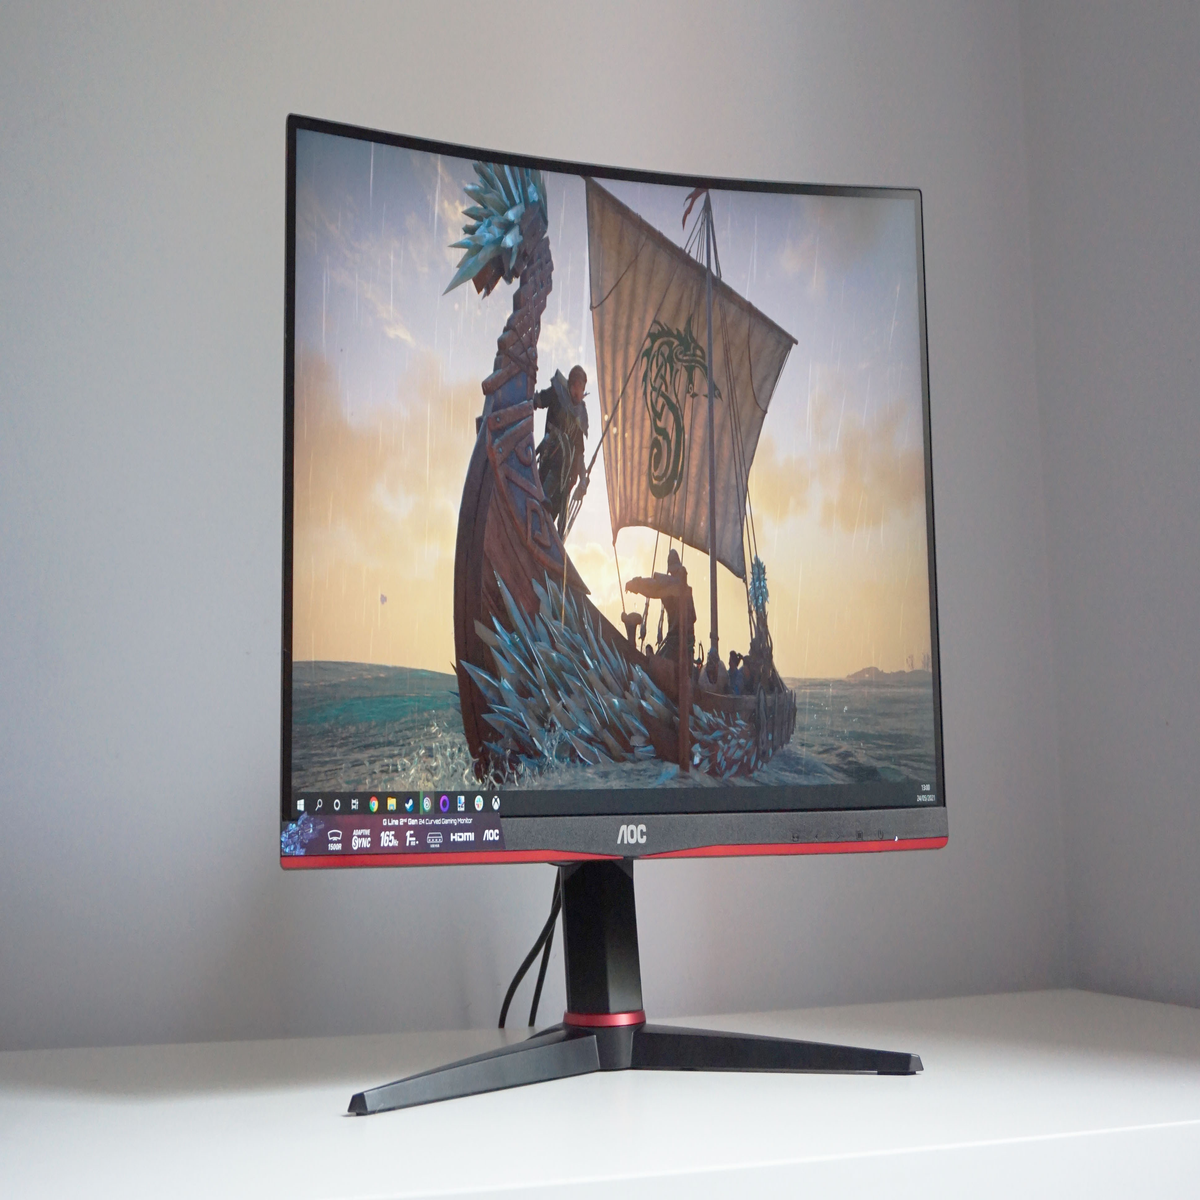 24” 1440p 165Hz Gaming Monitor - AOC Q24G2A Review 